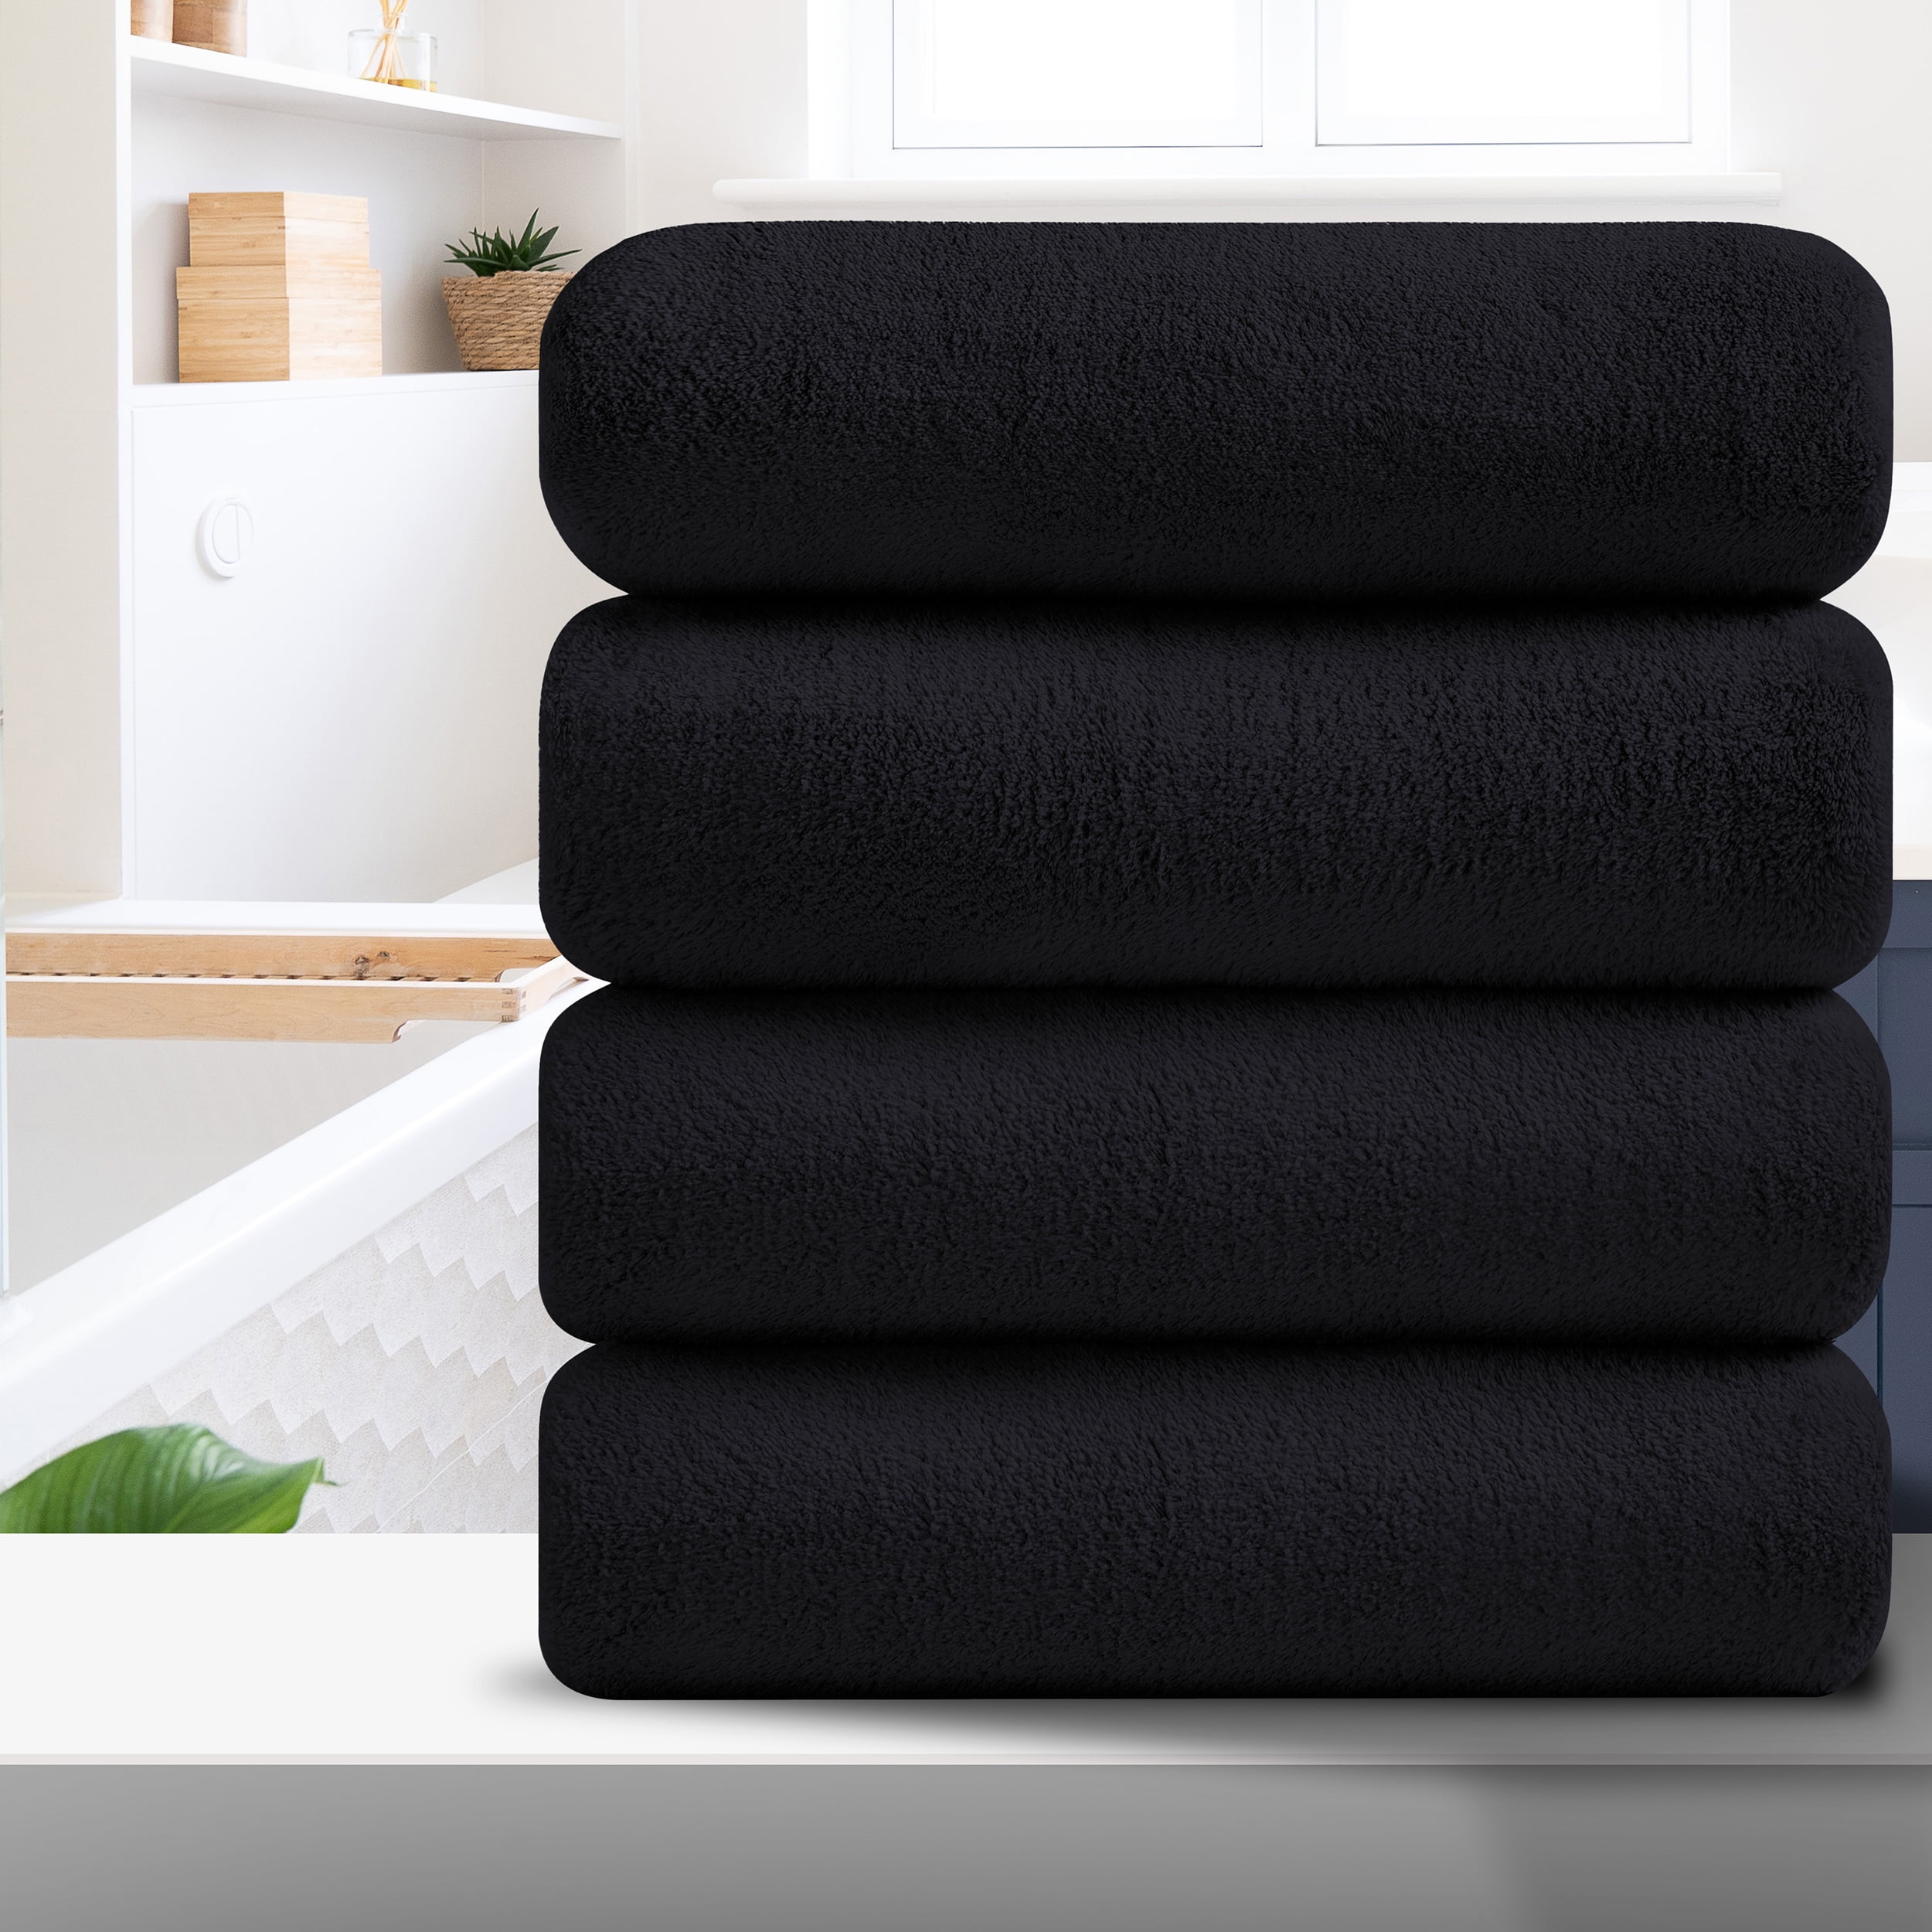 Smuge 4 Pack Bath Towels Extra Large 35 inchx 70 inchHighly Absorbent Quick Dry Bath Towels Oversized Microfiber Bath Sheets Soft Luxurious Towels for